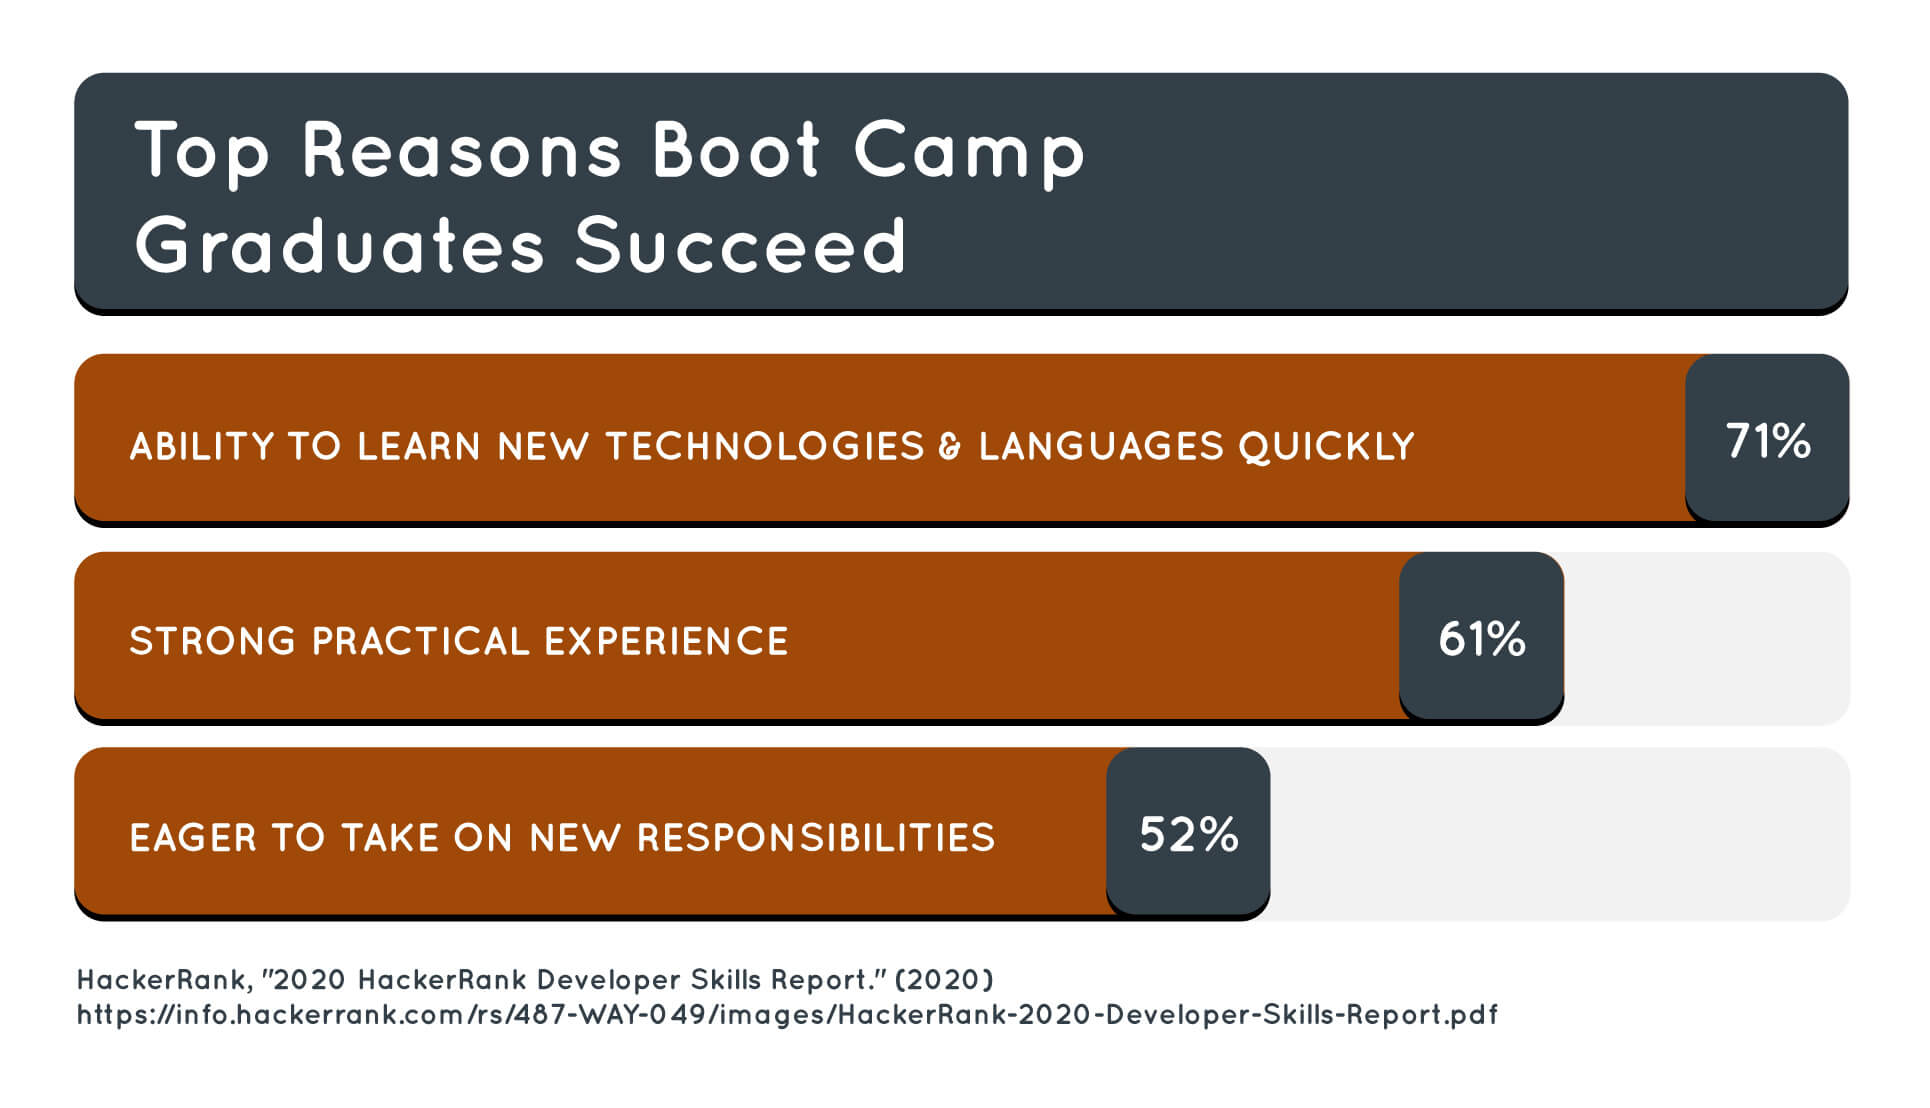 The top reasons boot camp graduates succeed